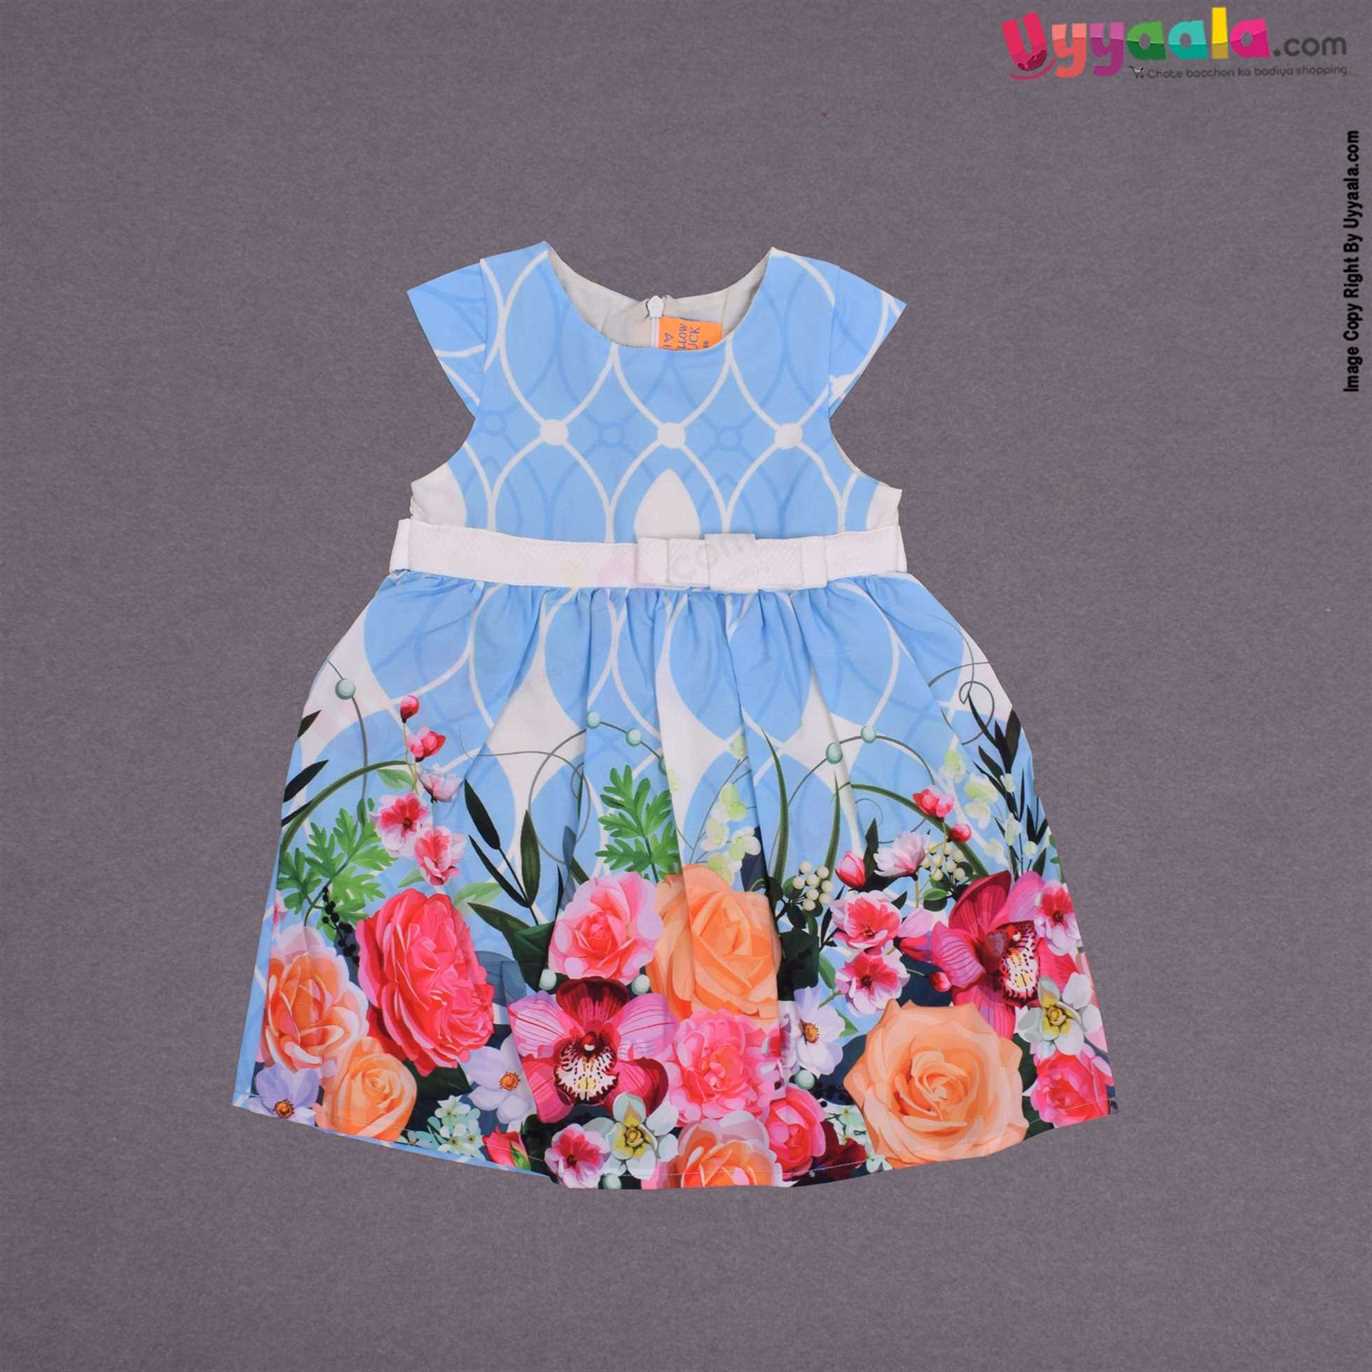 YELLOW DUCK Cotton sleeveless party wear frock for baby girl, back open zip model with belt, flowers print- Blue